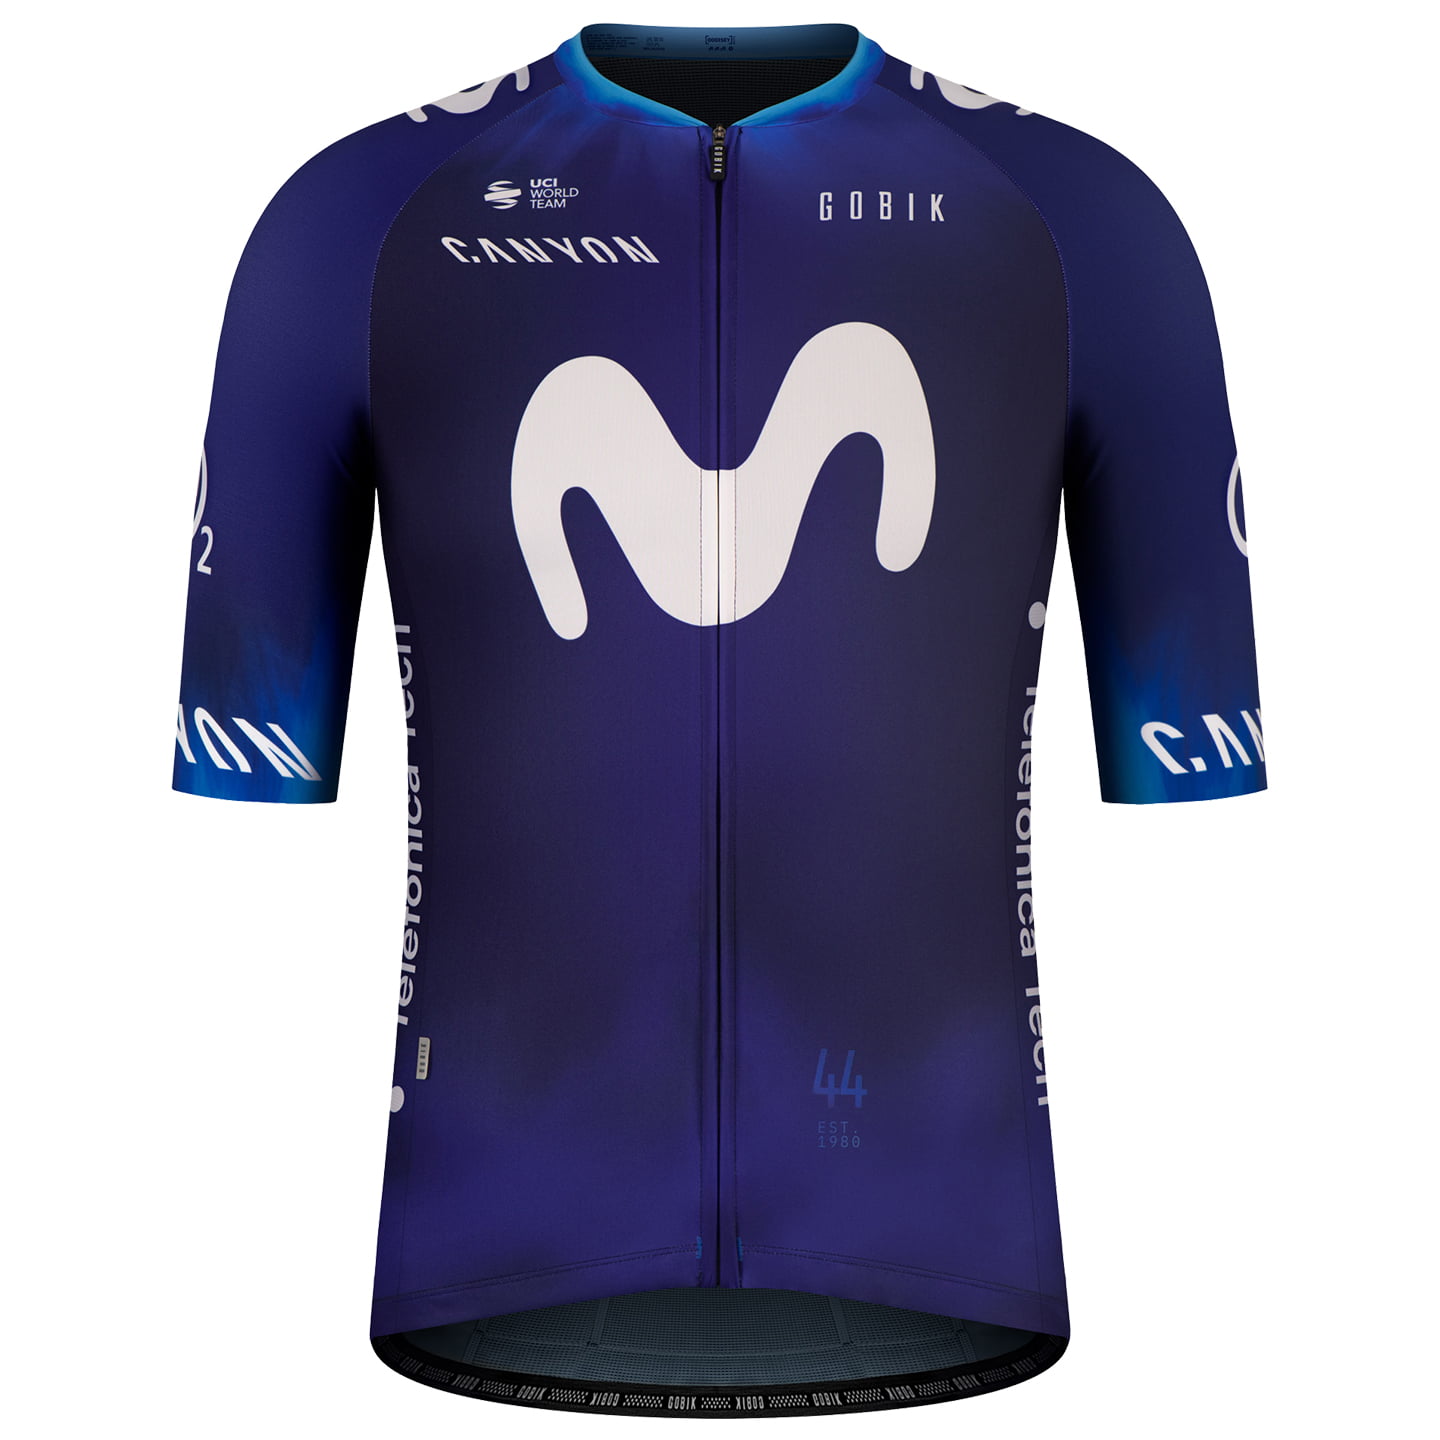 MOVISTAR TEAM 2023 Short Sleeve Jersey, for men, size M, Cycle jersey, Cycling clothing